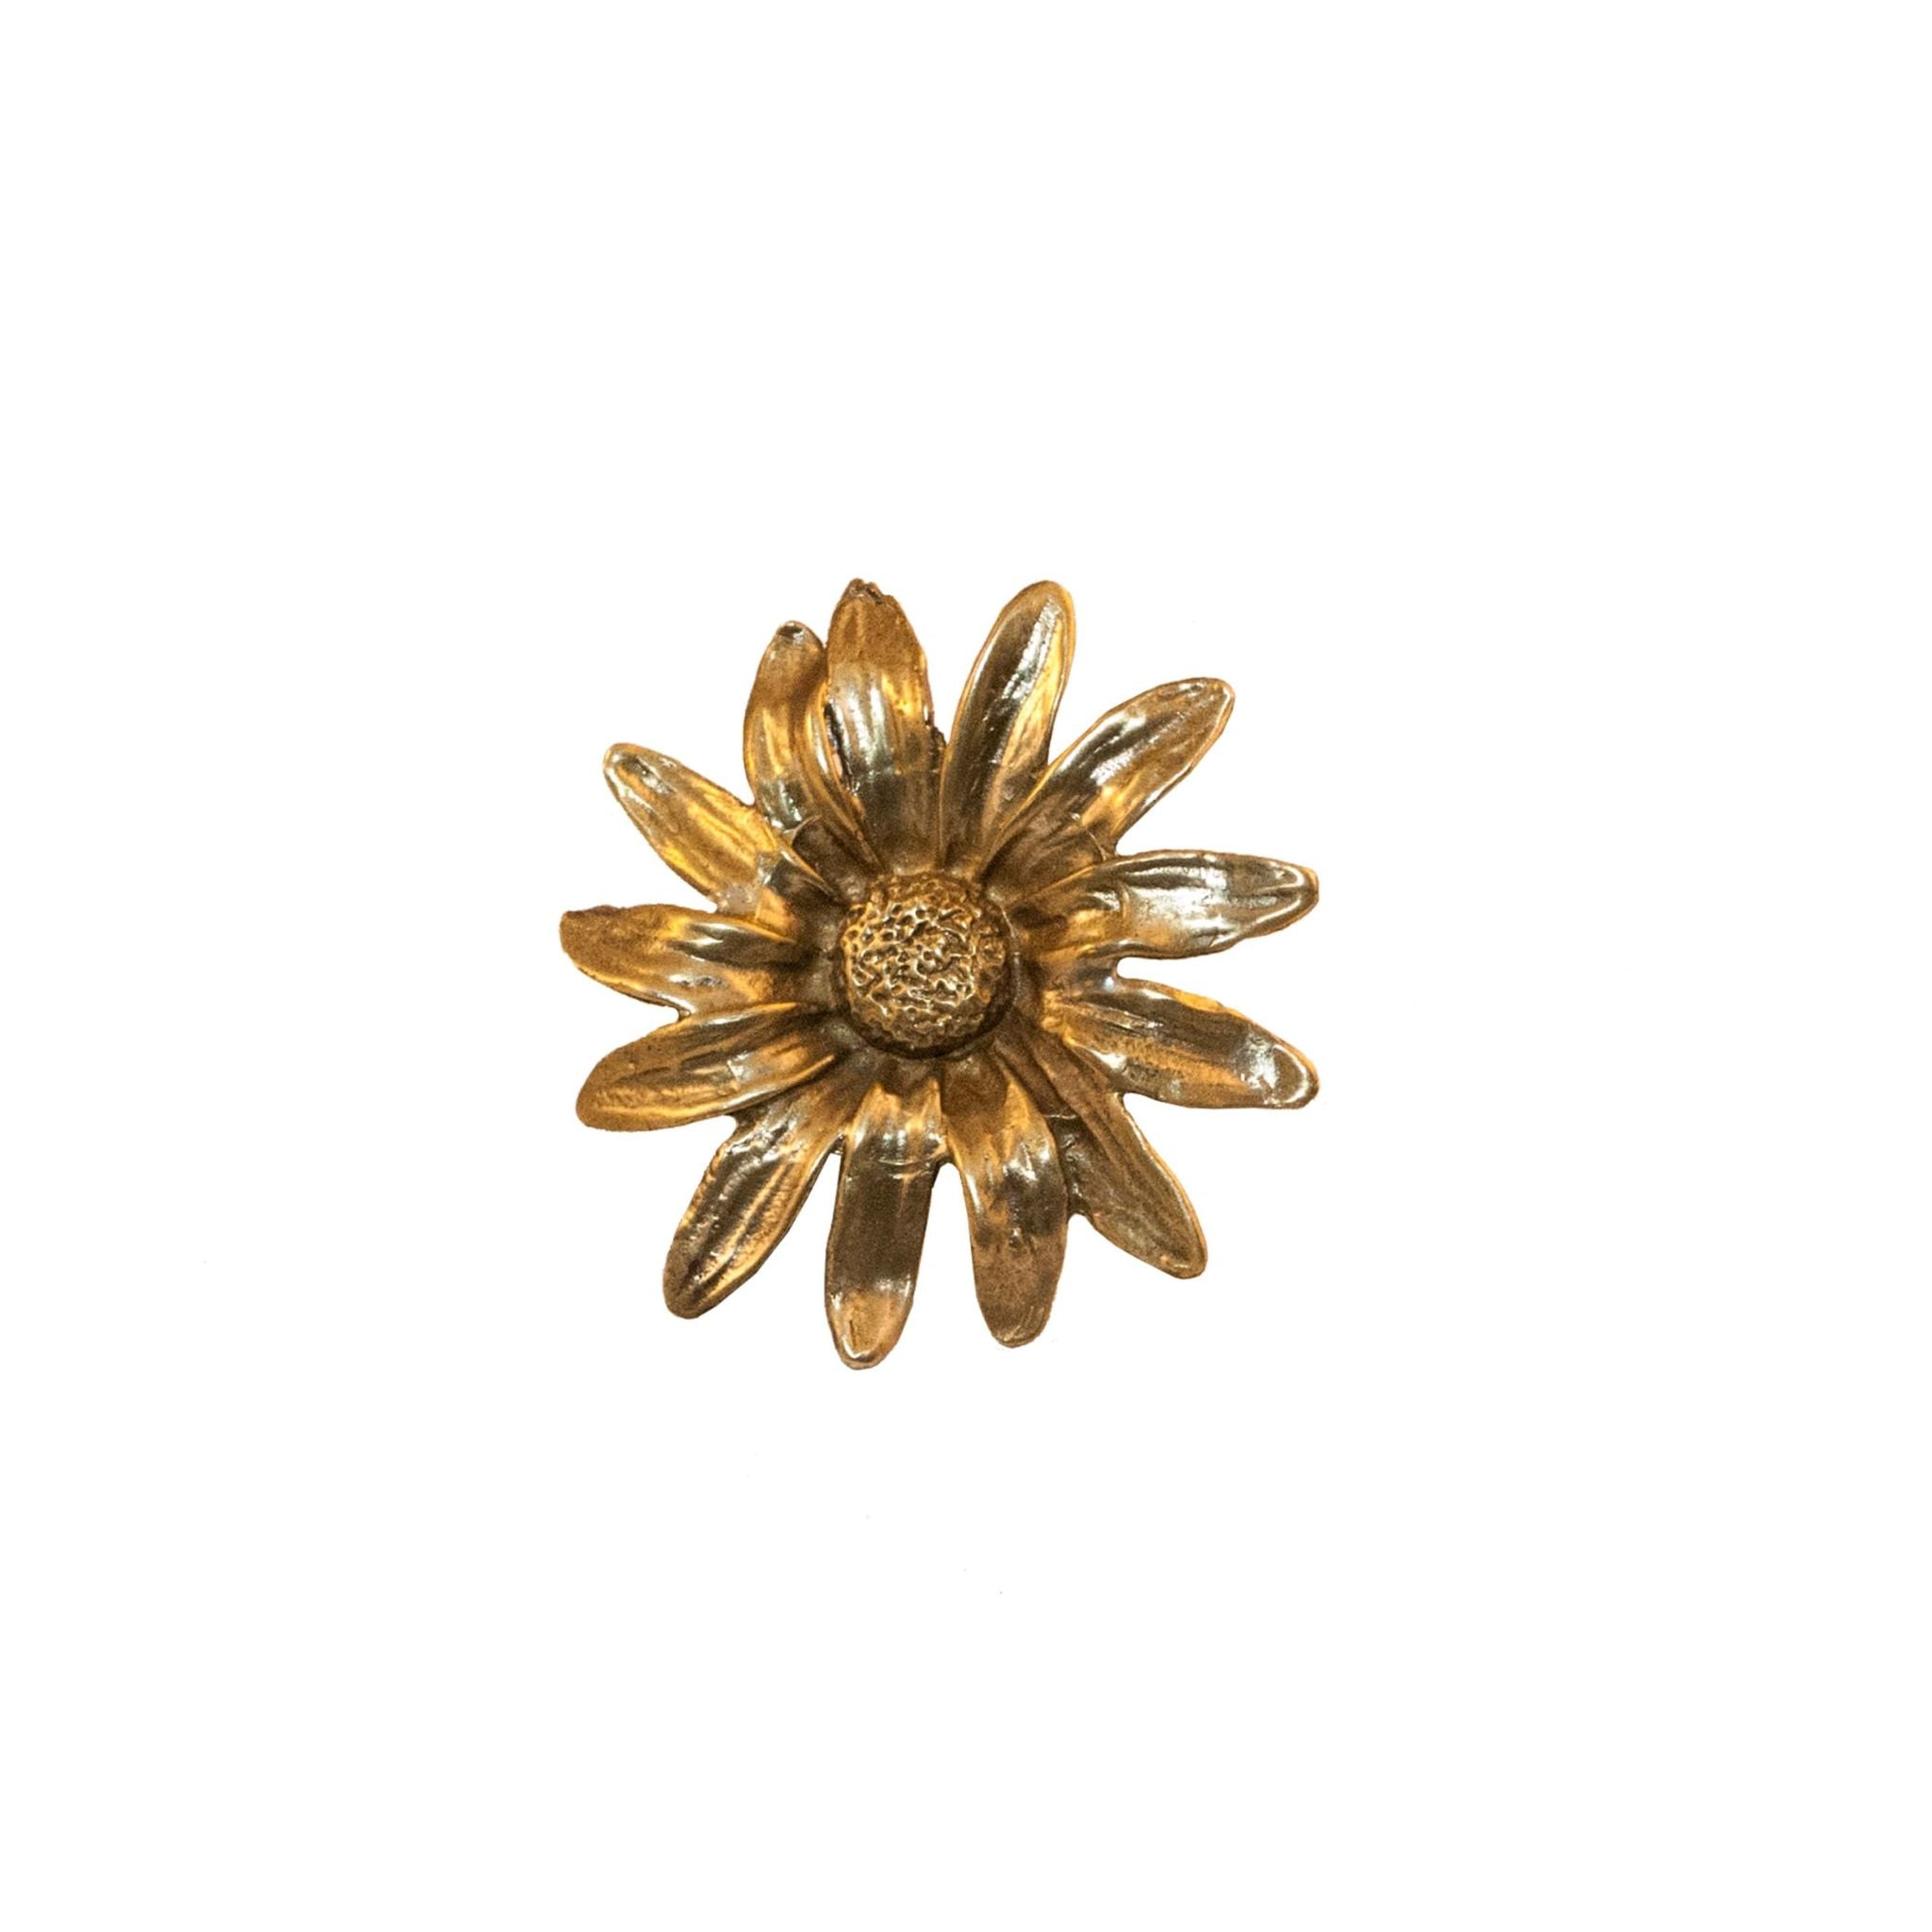 Brass daisy-shaped knob, perfect for cabinets and drawers, adds a touch of elegance to any furniture piece.